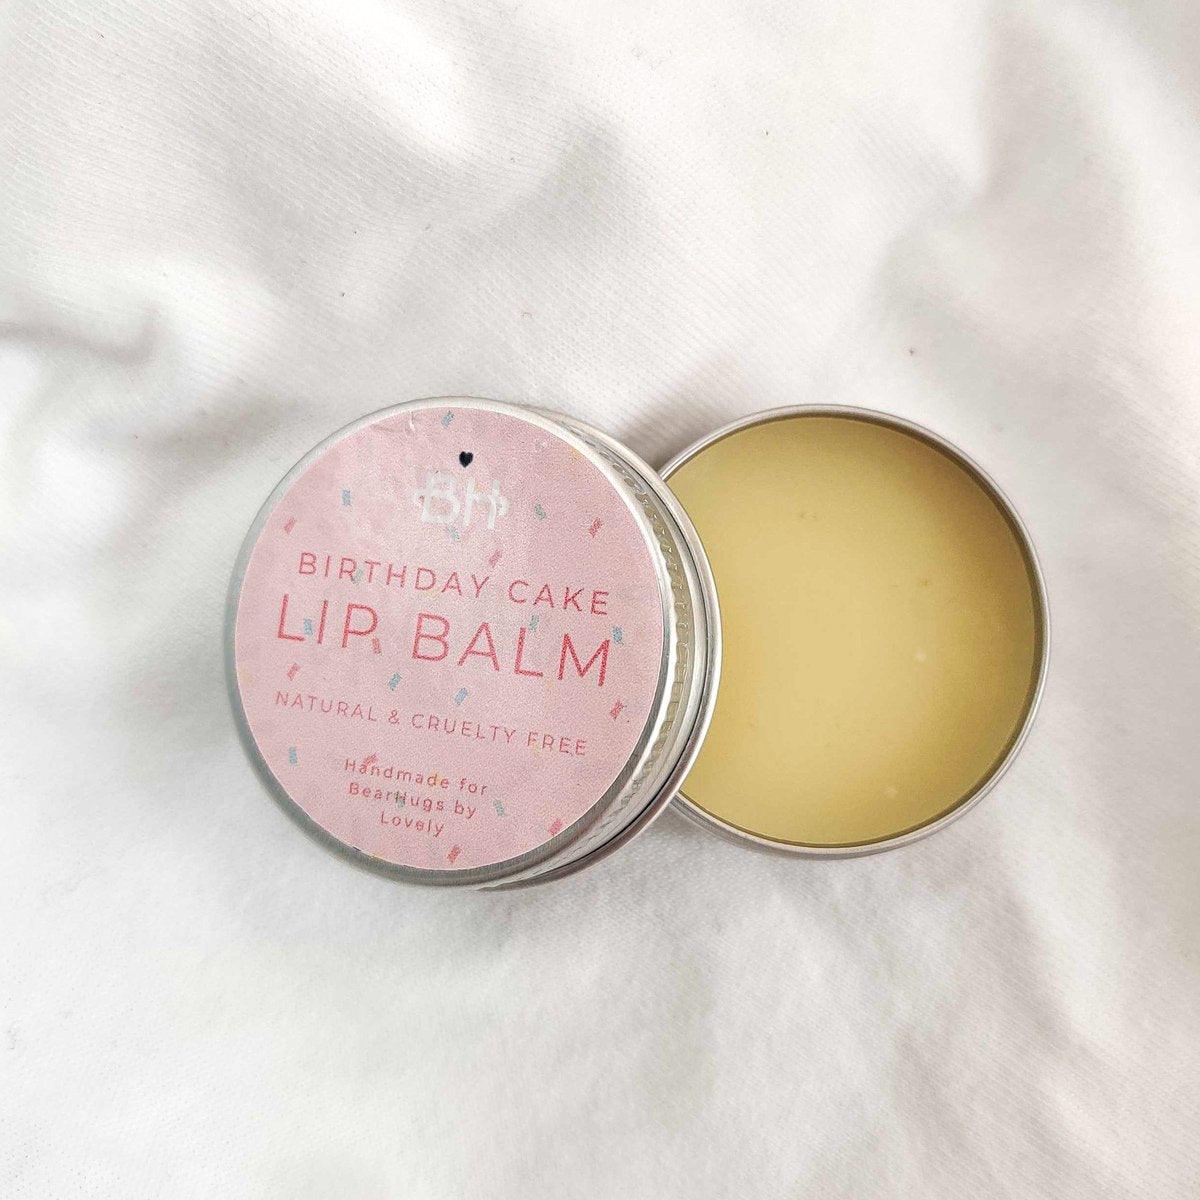 Birthday Cake Lip Balm - My Store - thinking of you gifts by post